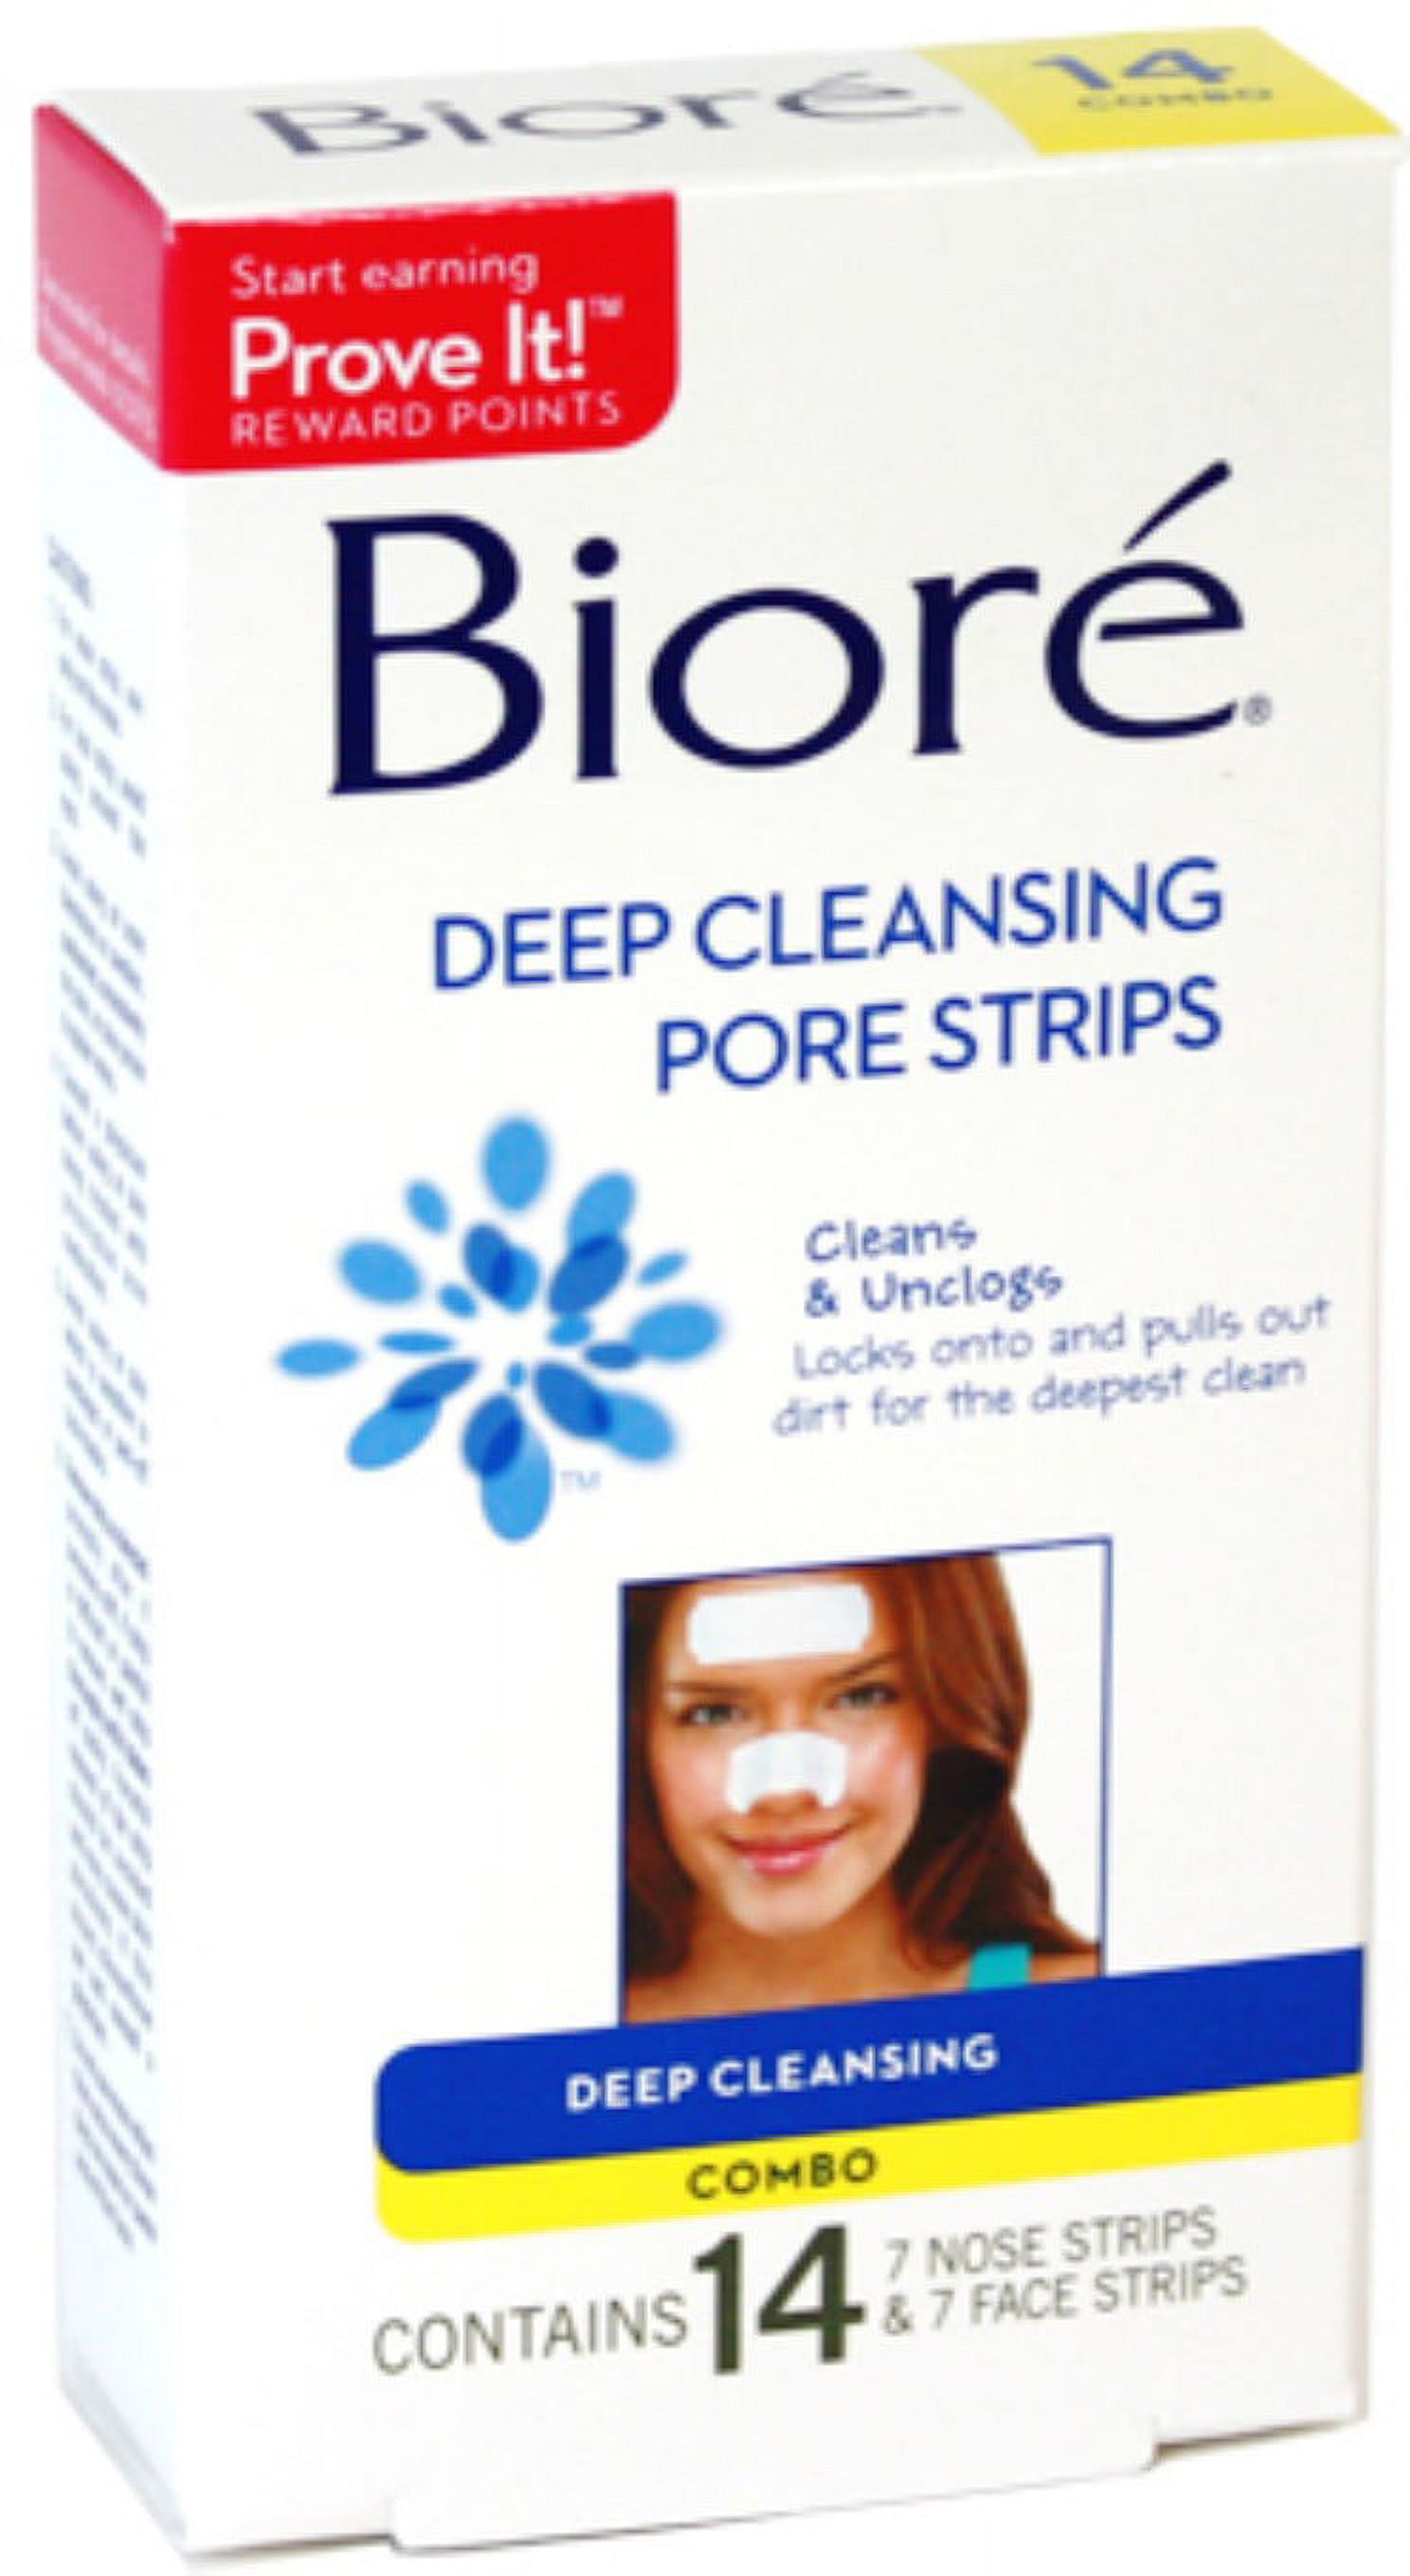 Biore Deep Cleansing Pore Strips Nose, 14 Each (Pack of 2) - image 3 of 3